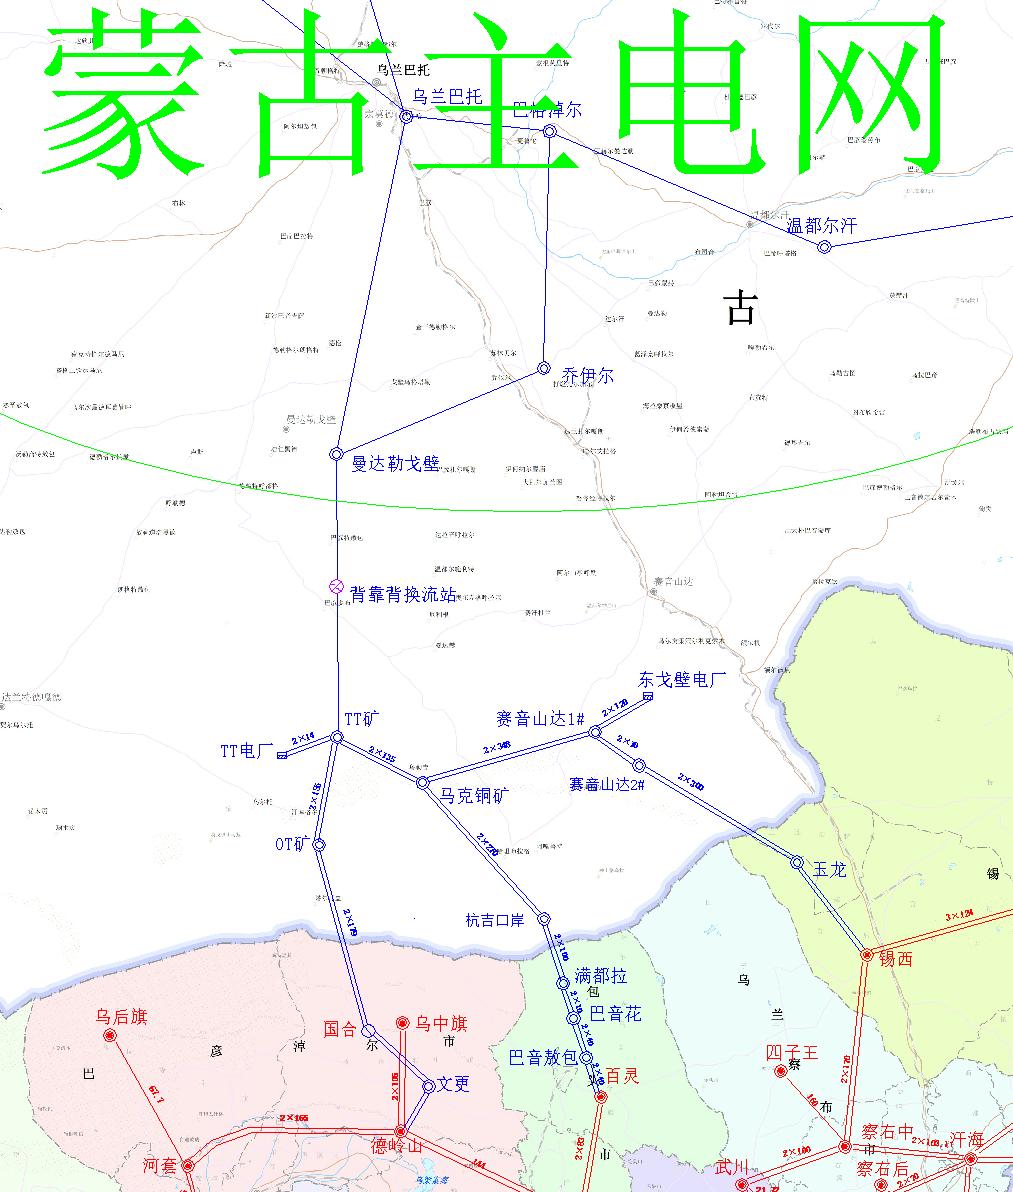 2.4 Interconnection plans Inner Mongolia grid and Mongolia grid Near-term Grid plan